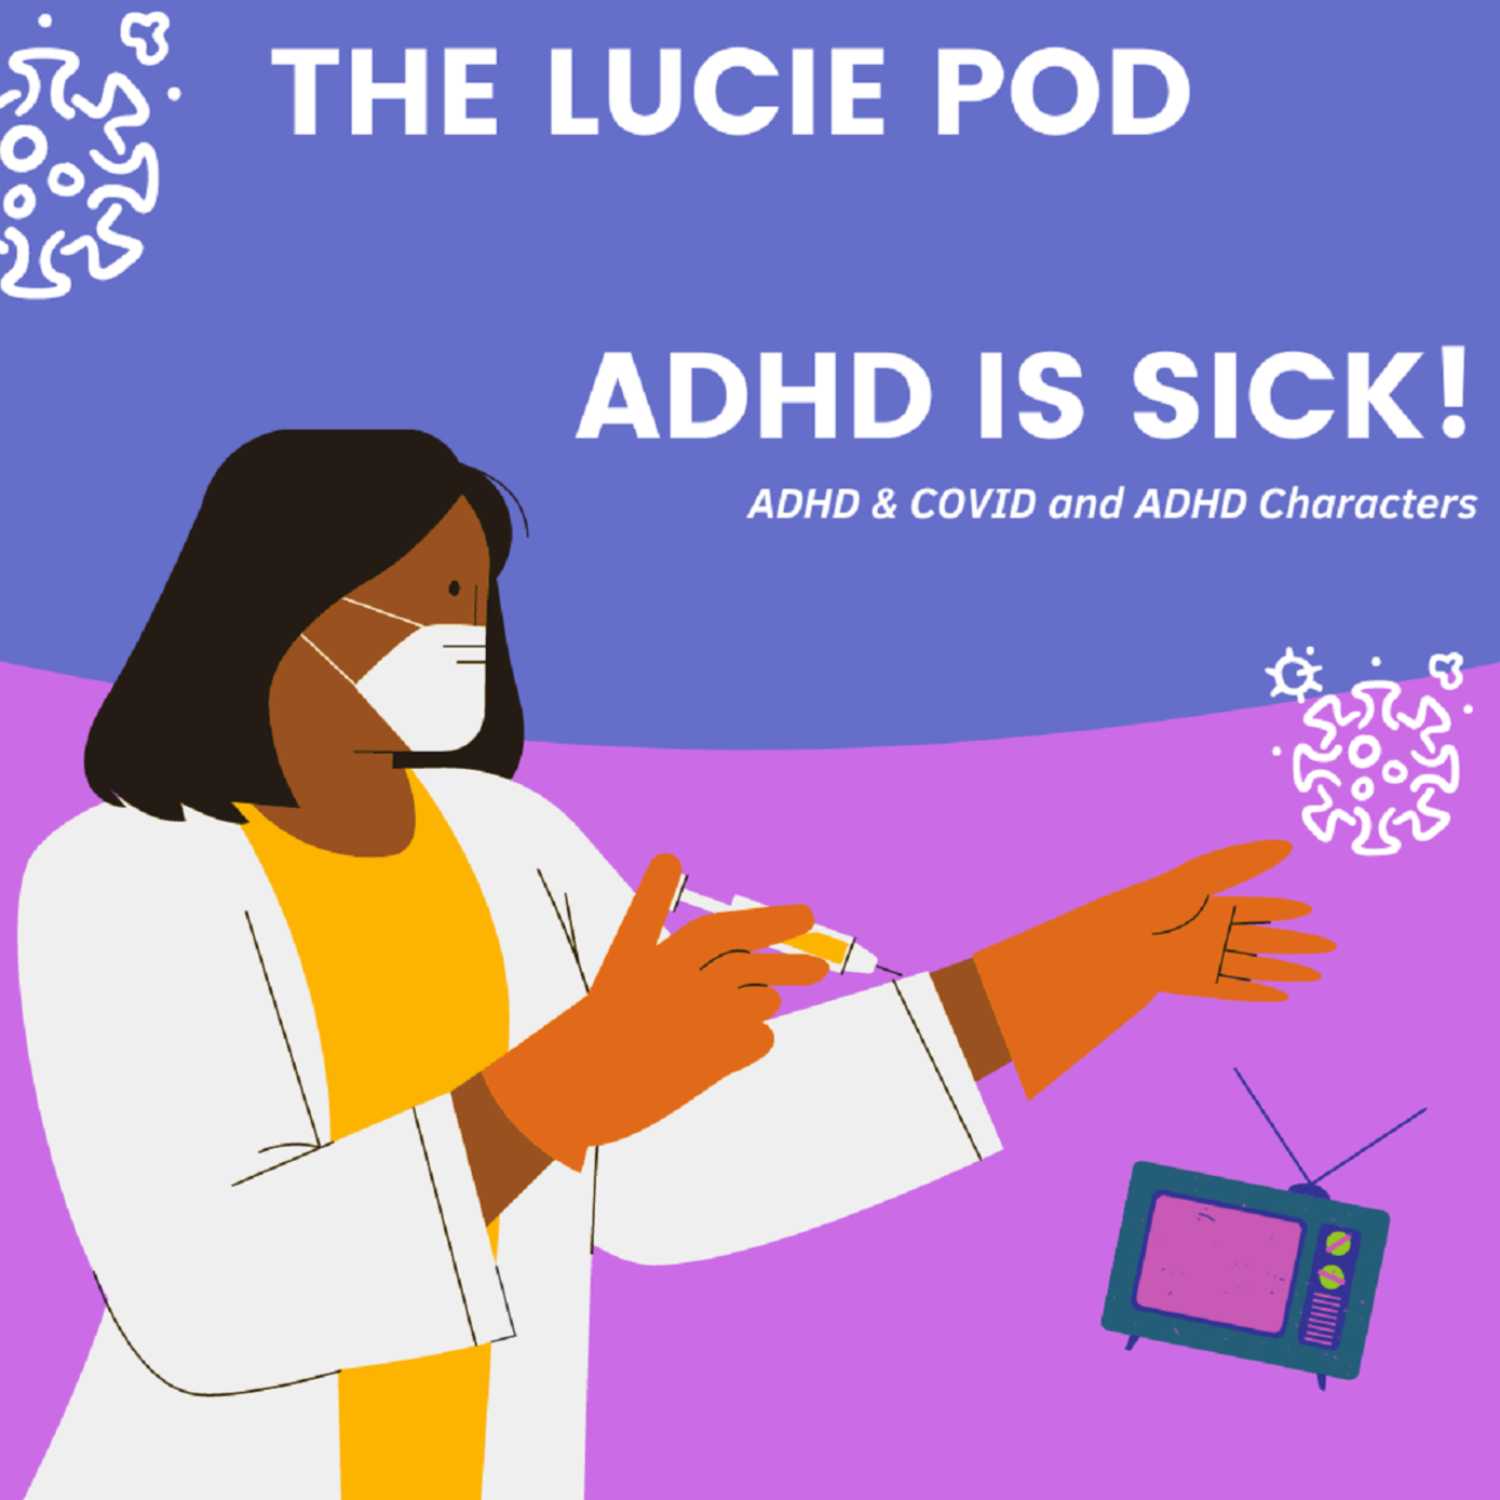 ADHD is Sick: Spicy Coughs & Bart Simpson